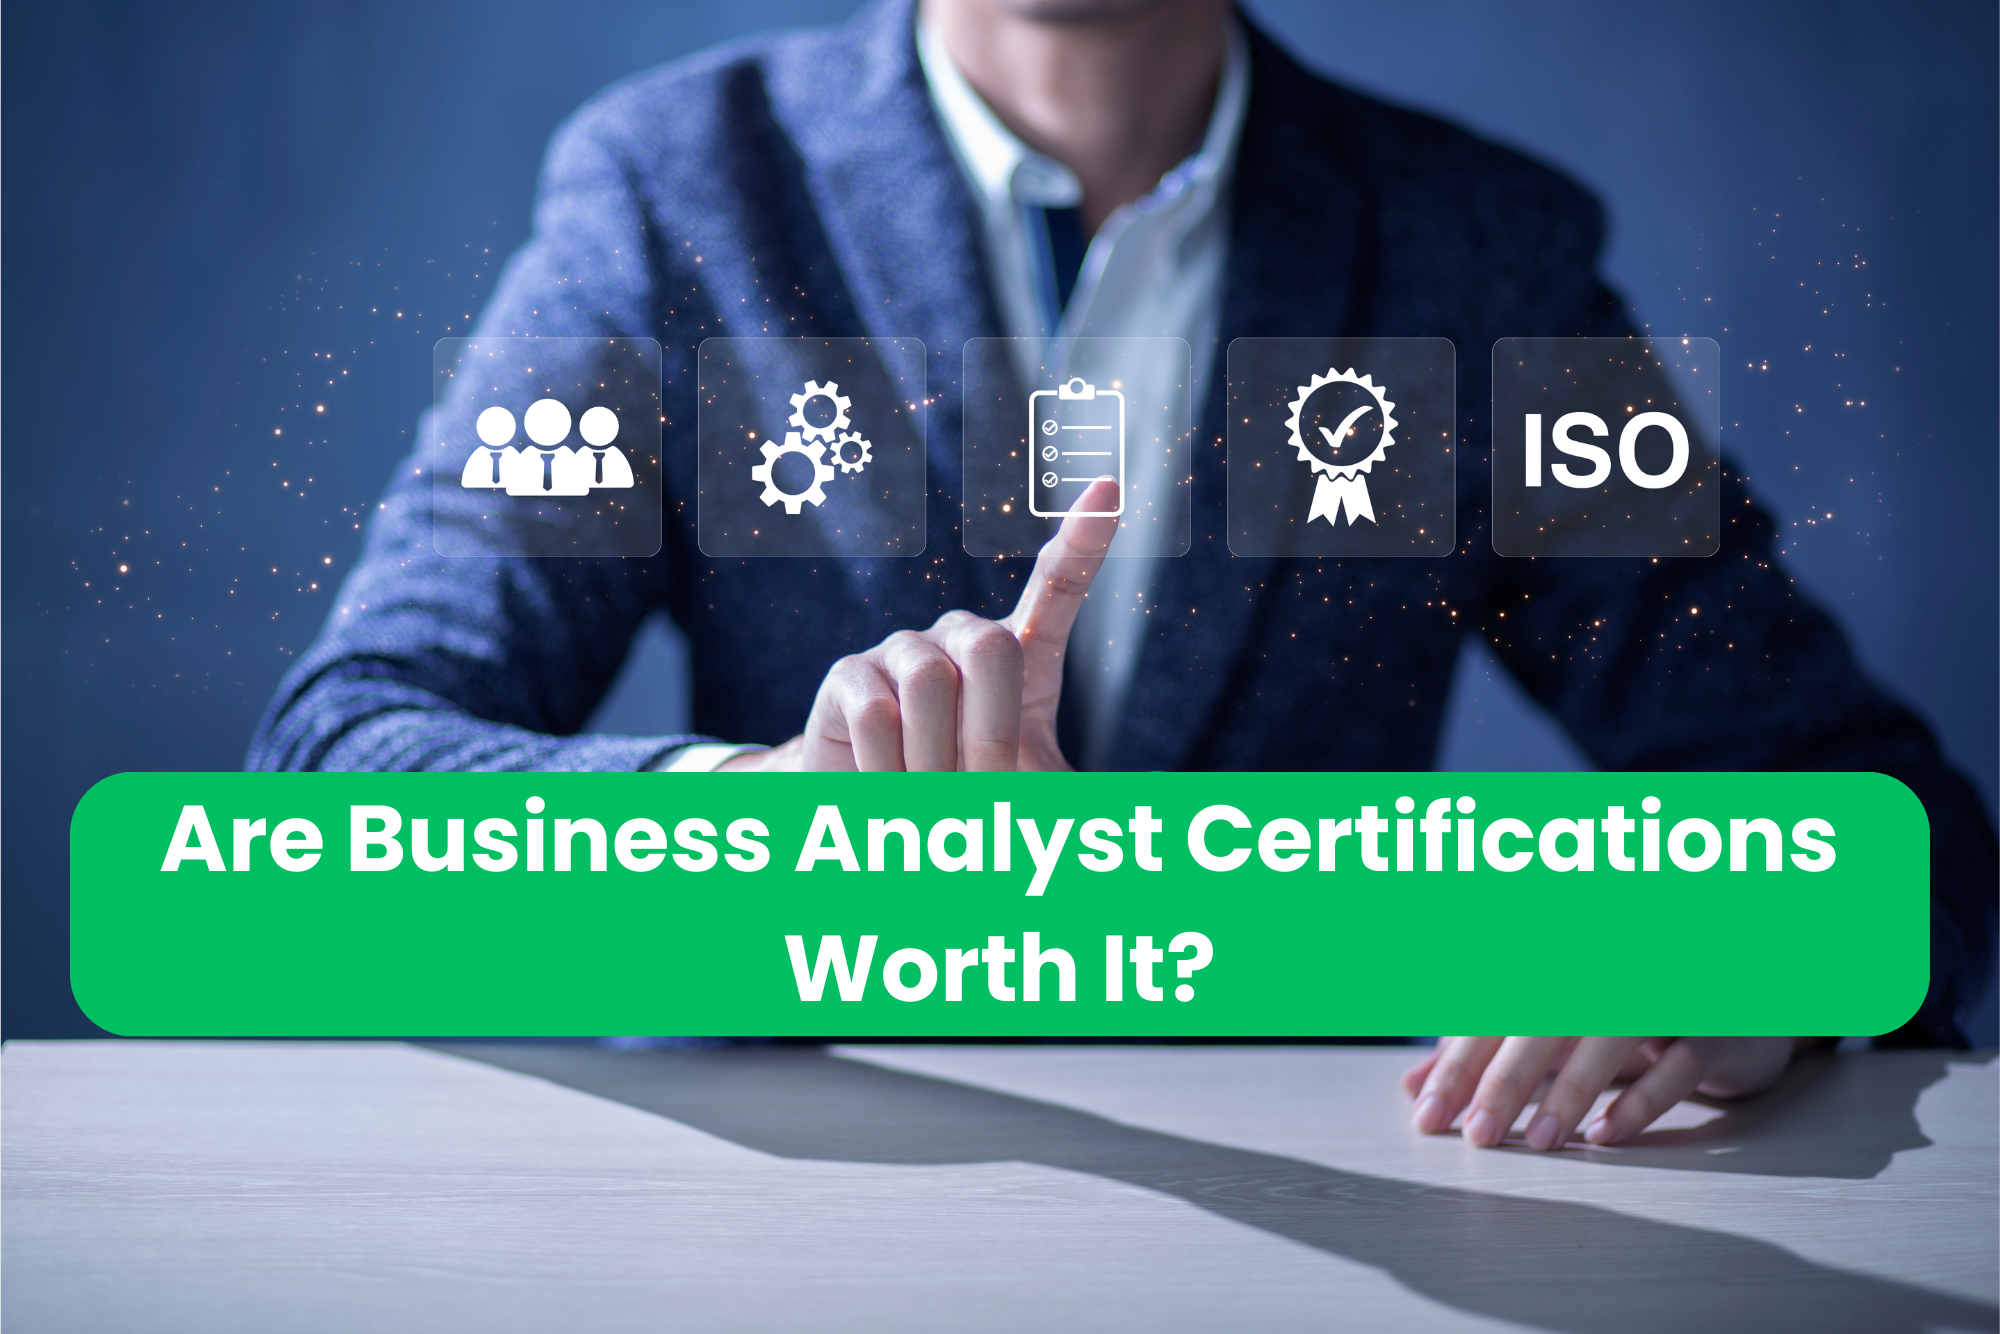 Are Business Analyst Certifications Worth It?